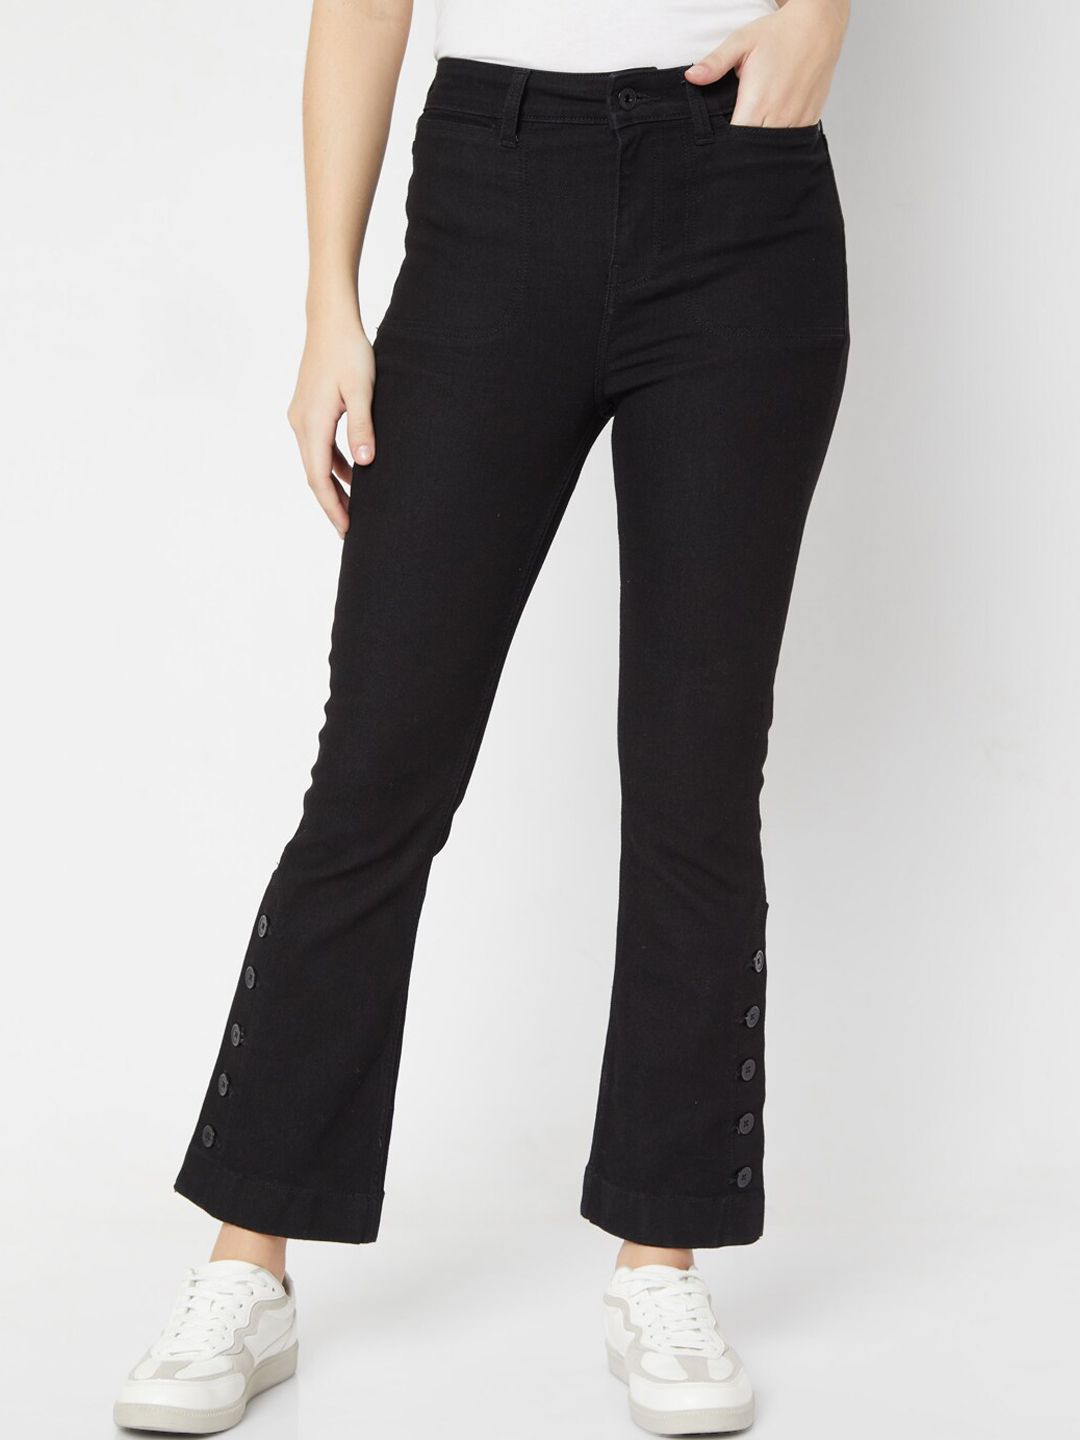 Vero Moda Women Black High-Rise Stretchable Bootcut Jeans Price in India